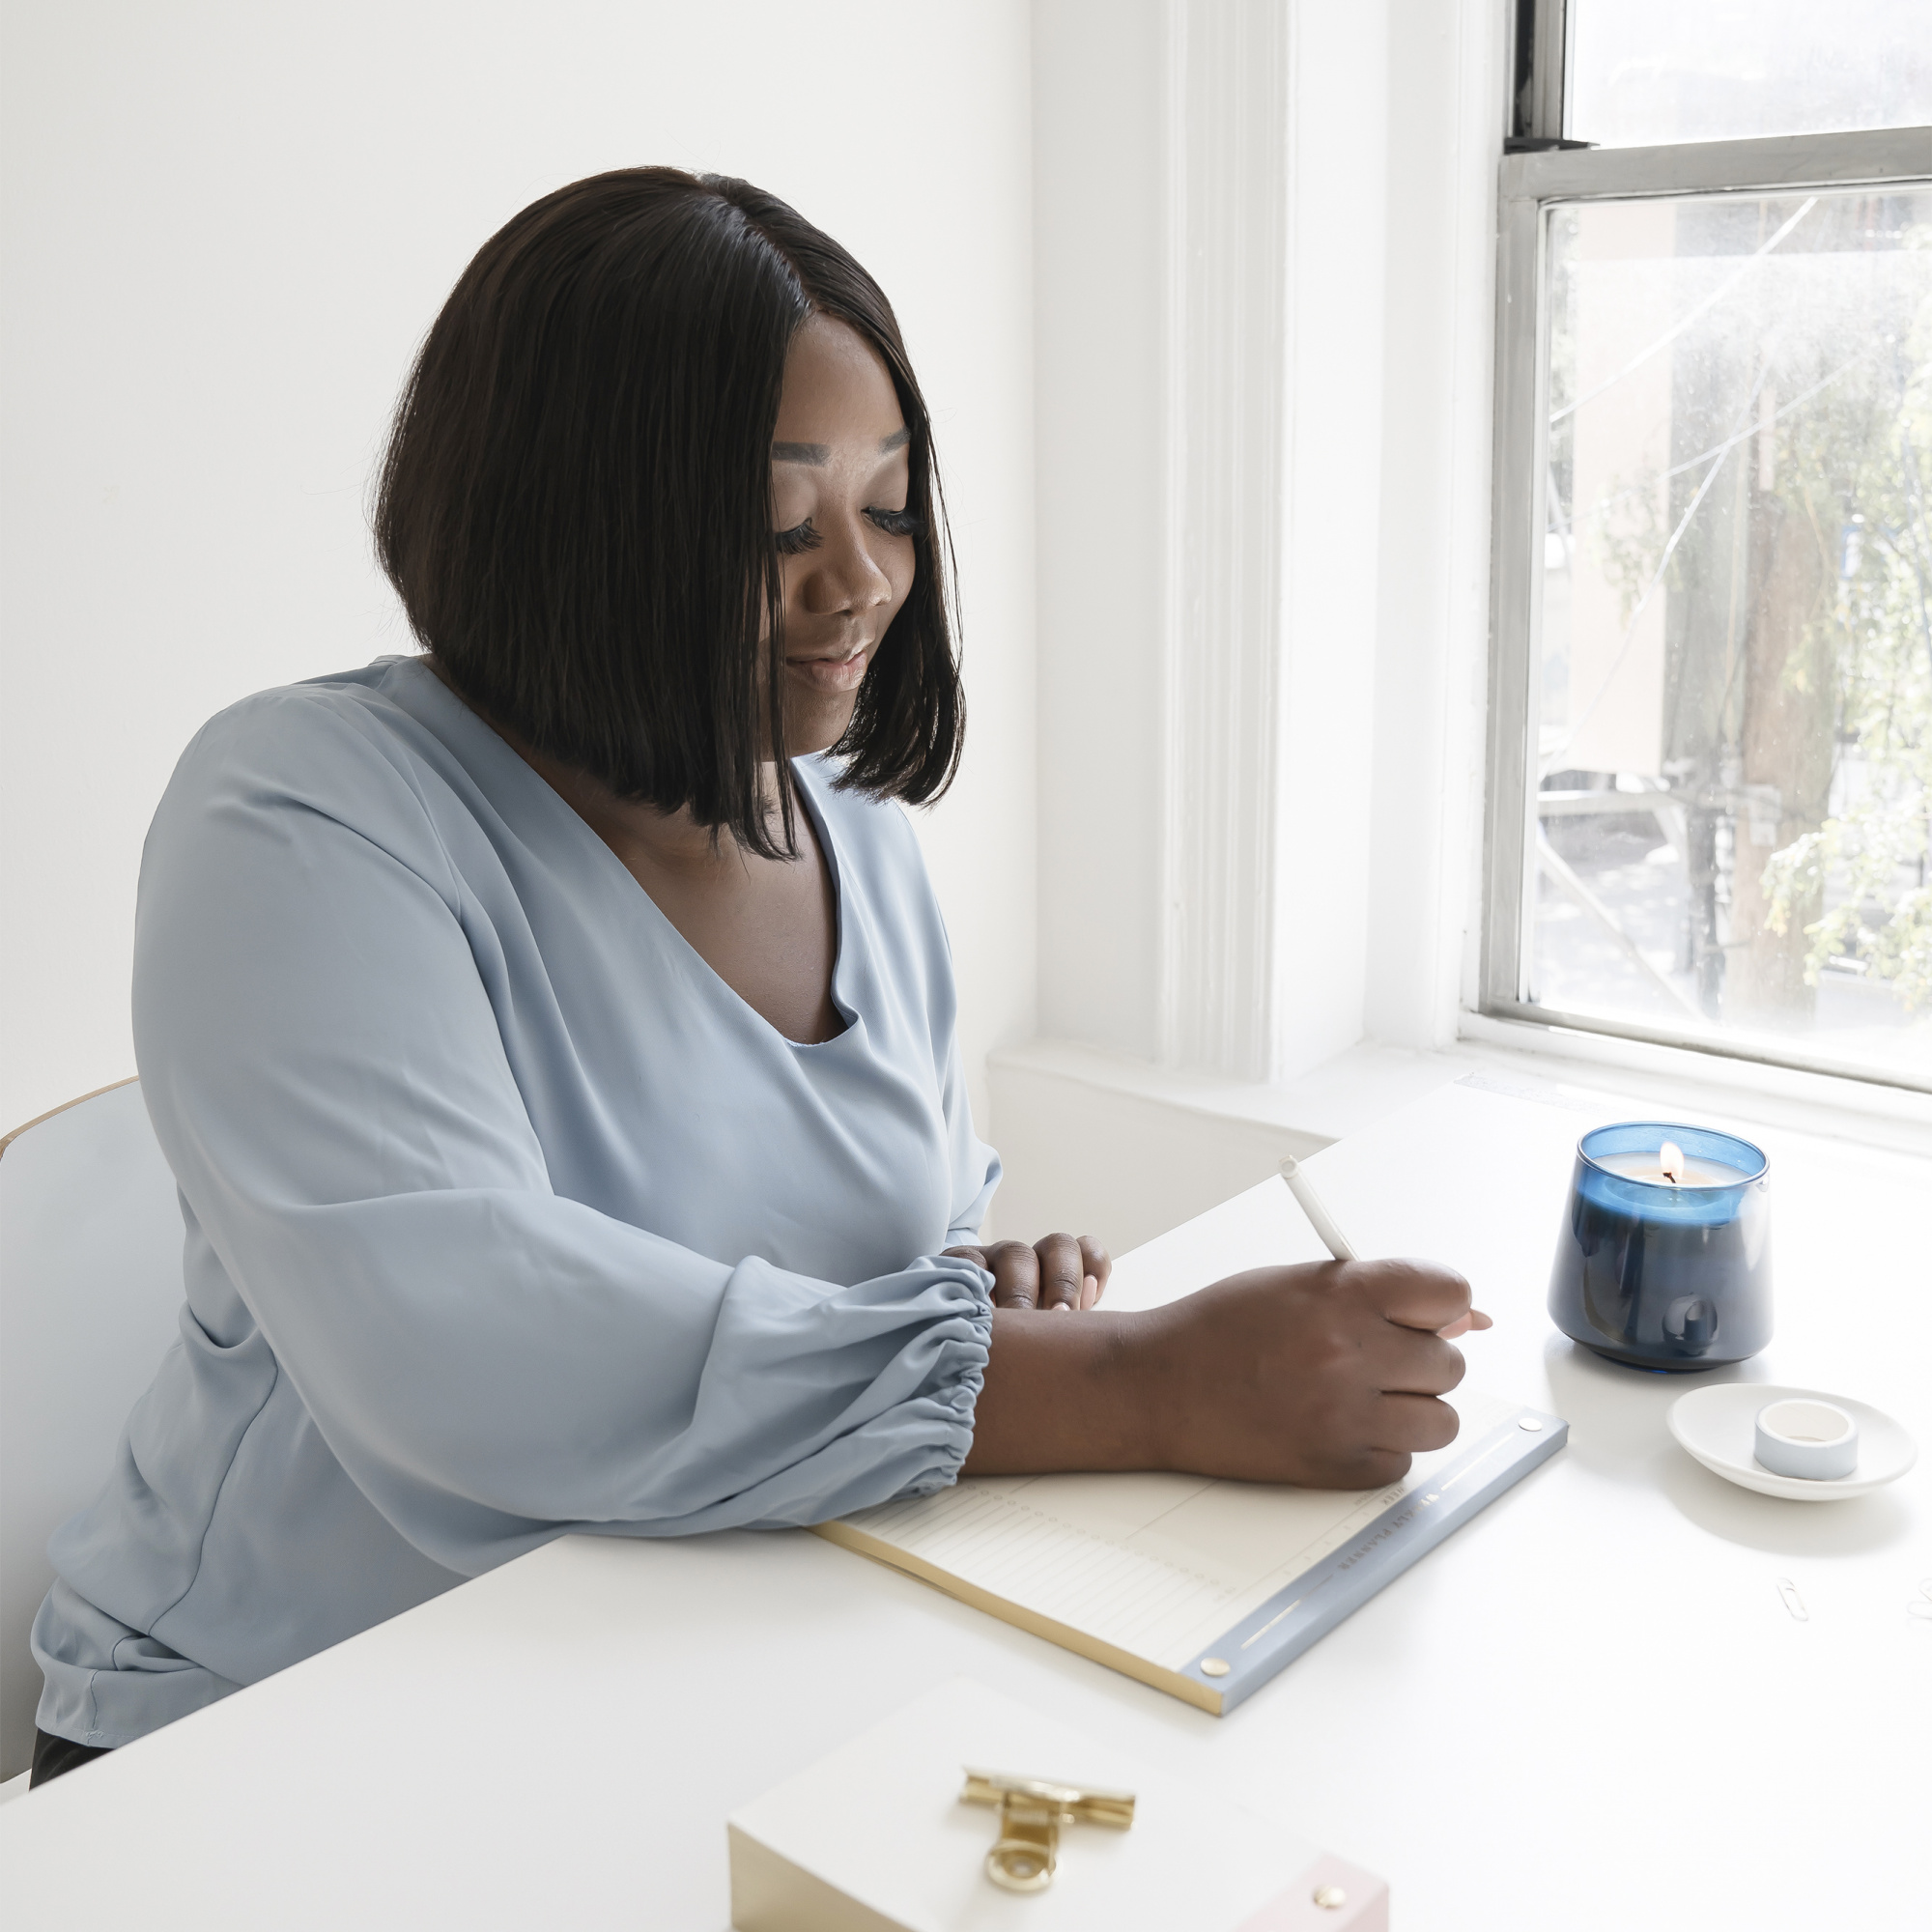 common menopause questions, Black woman with chin-length hair in blue blouse writing